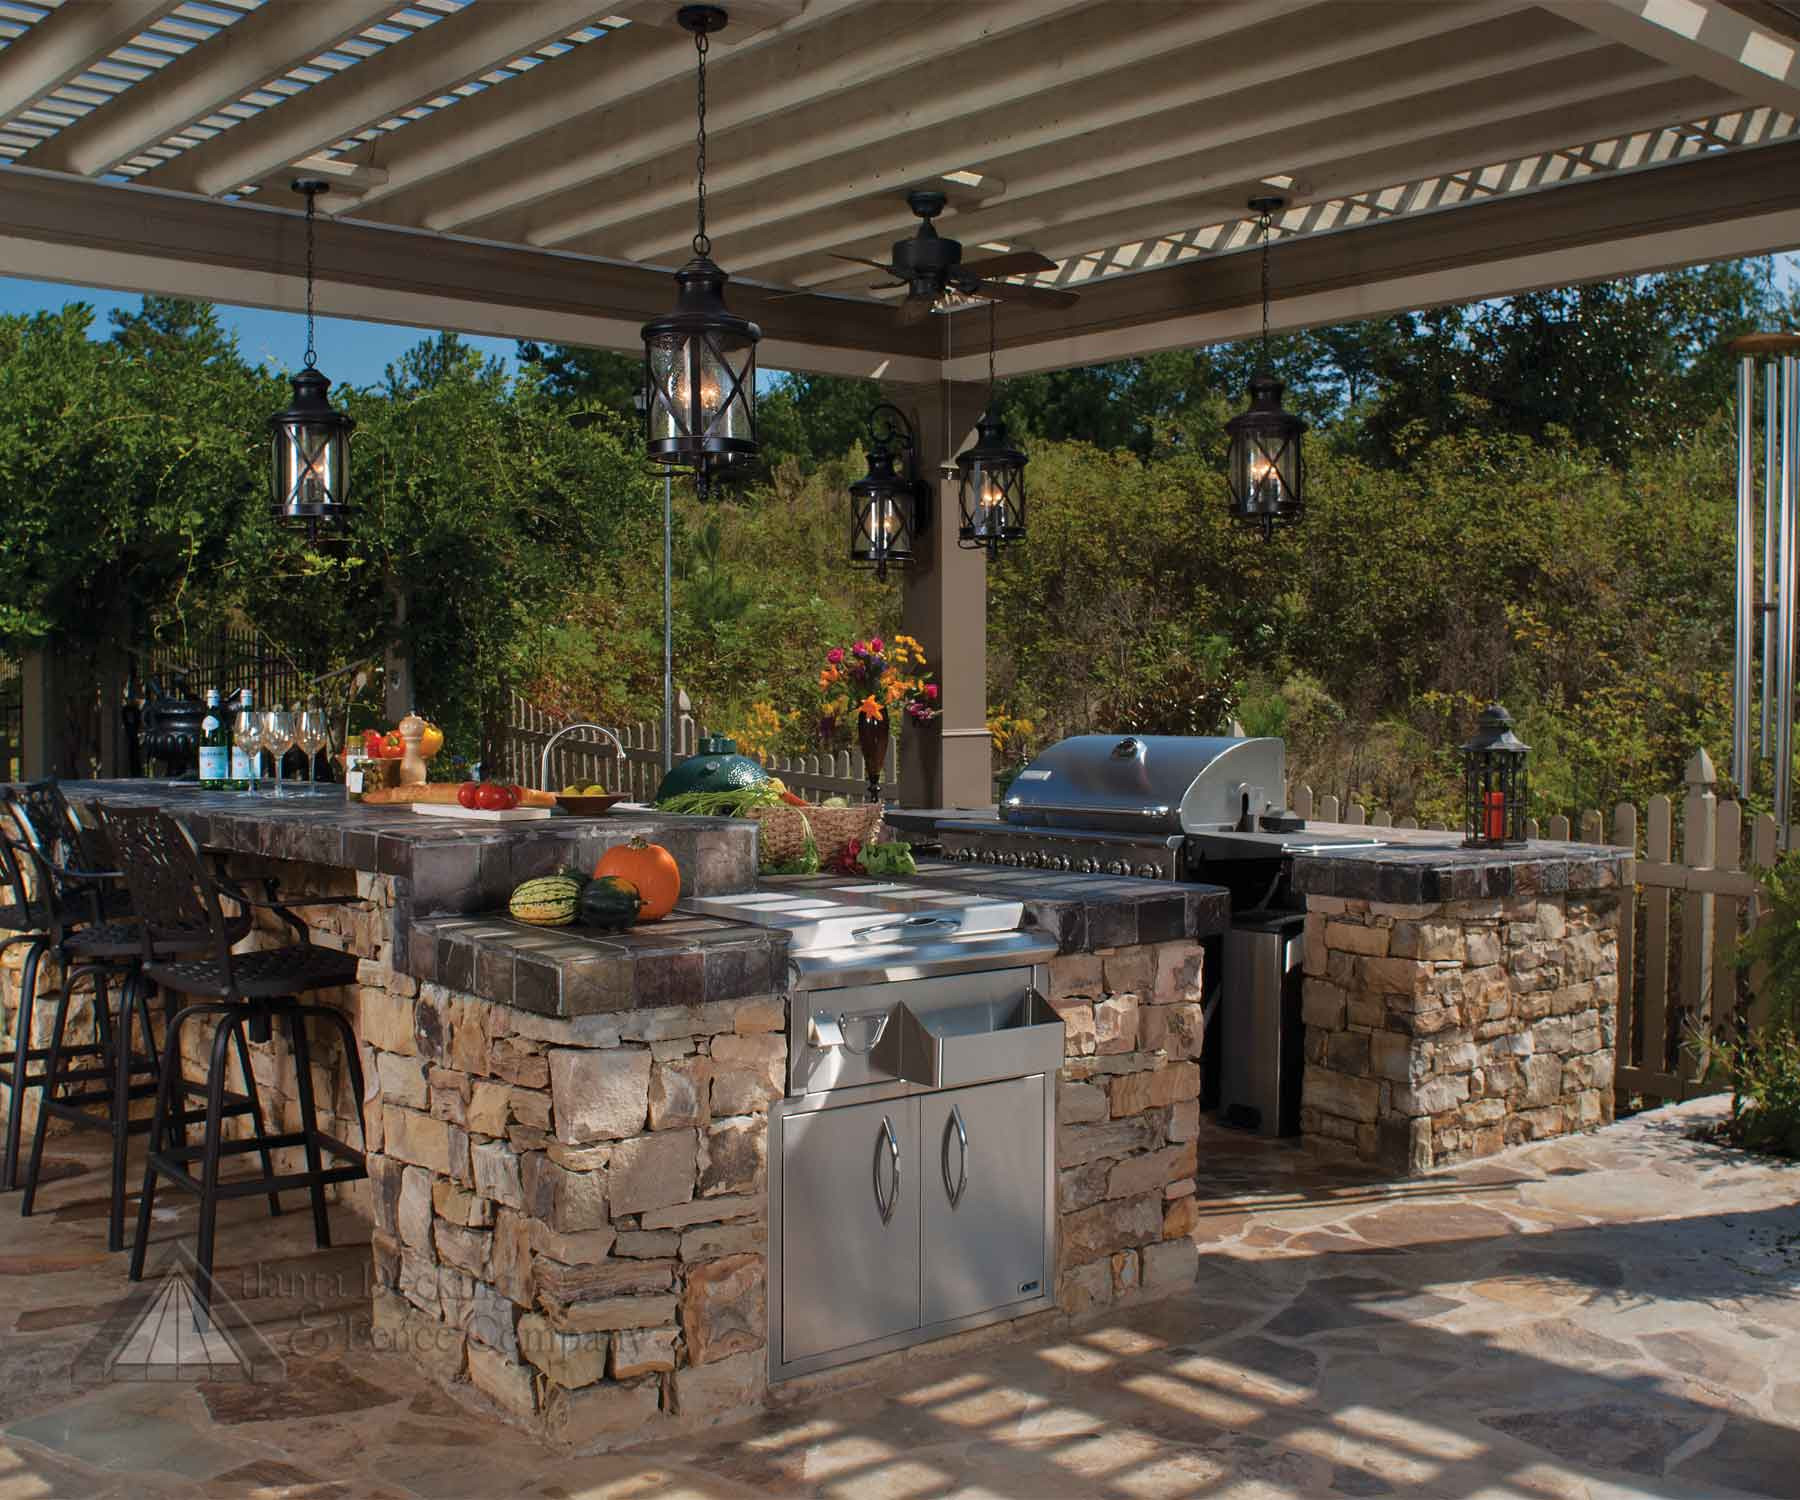 Outdoor Kitchen Pics
 Outdoor Kitchen Designing The Perfect Backyard Cooking